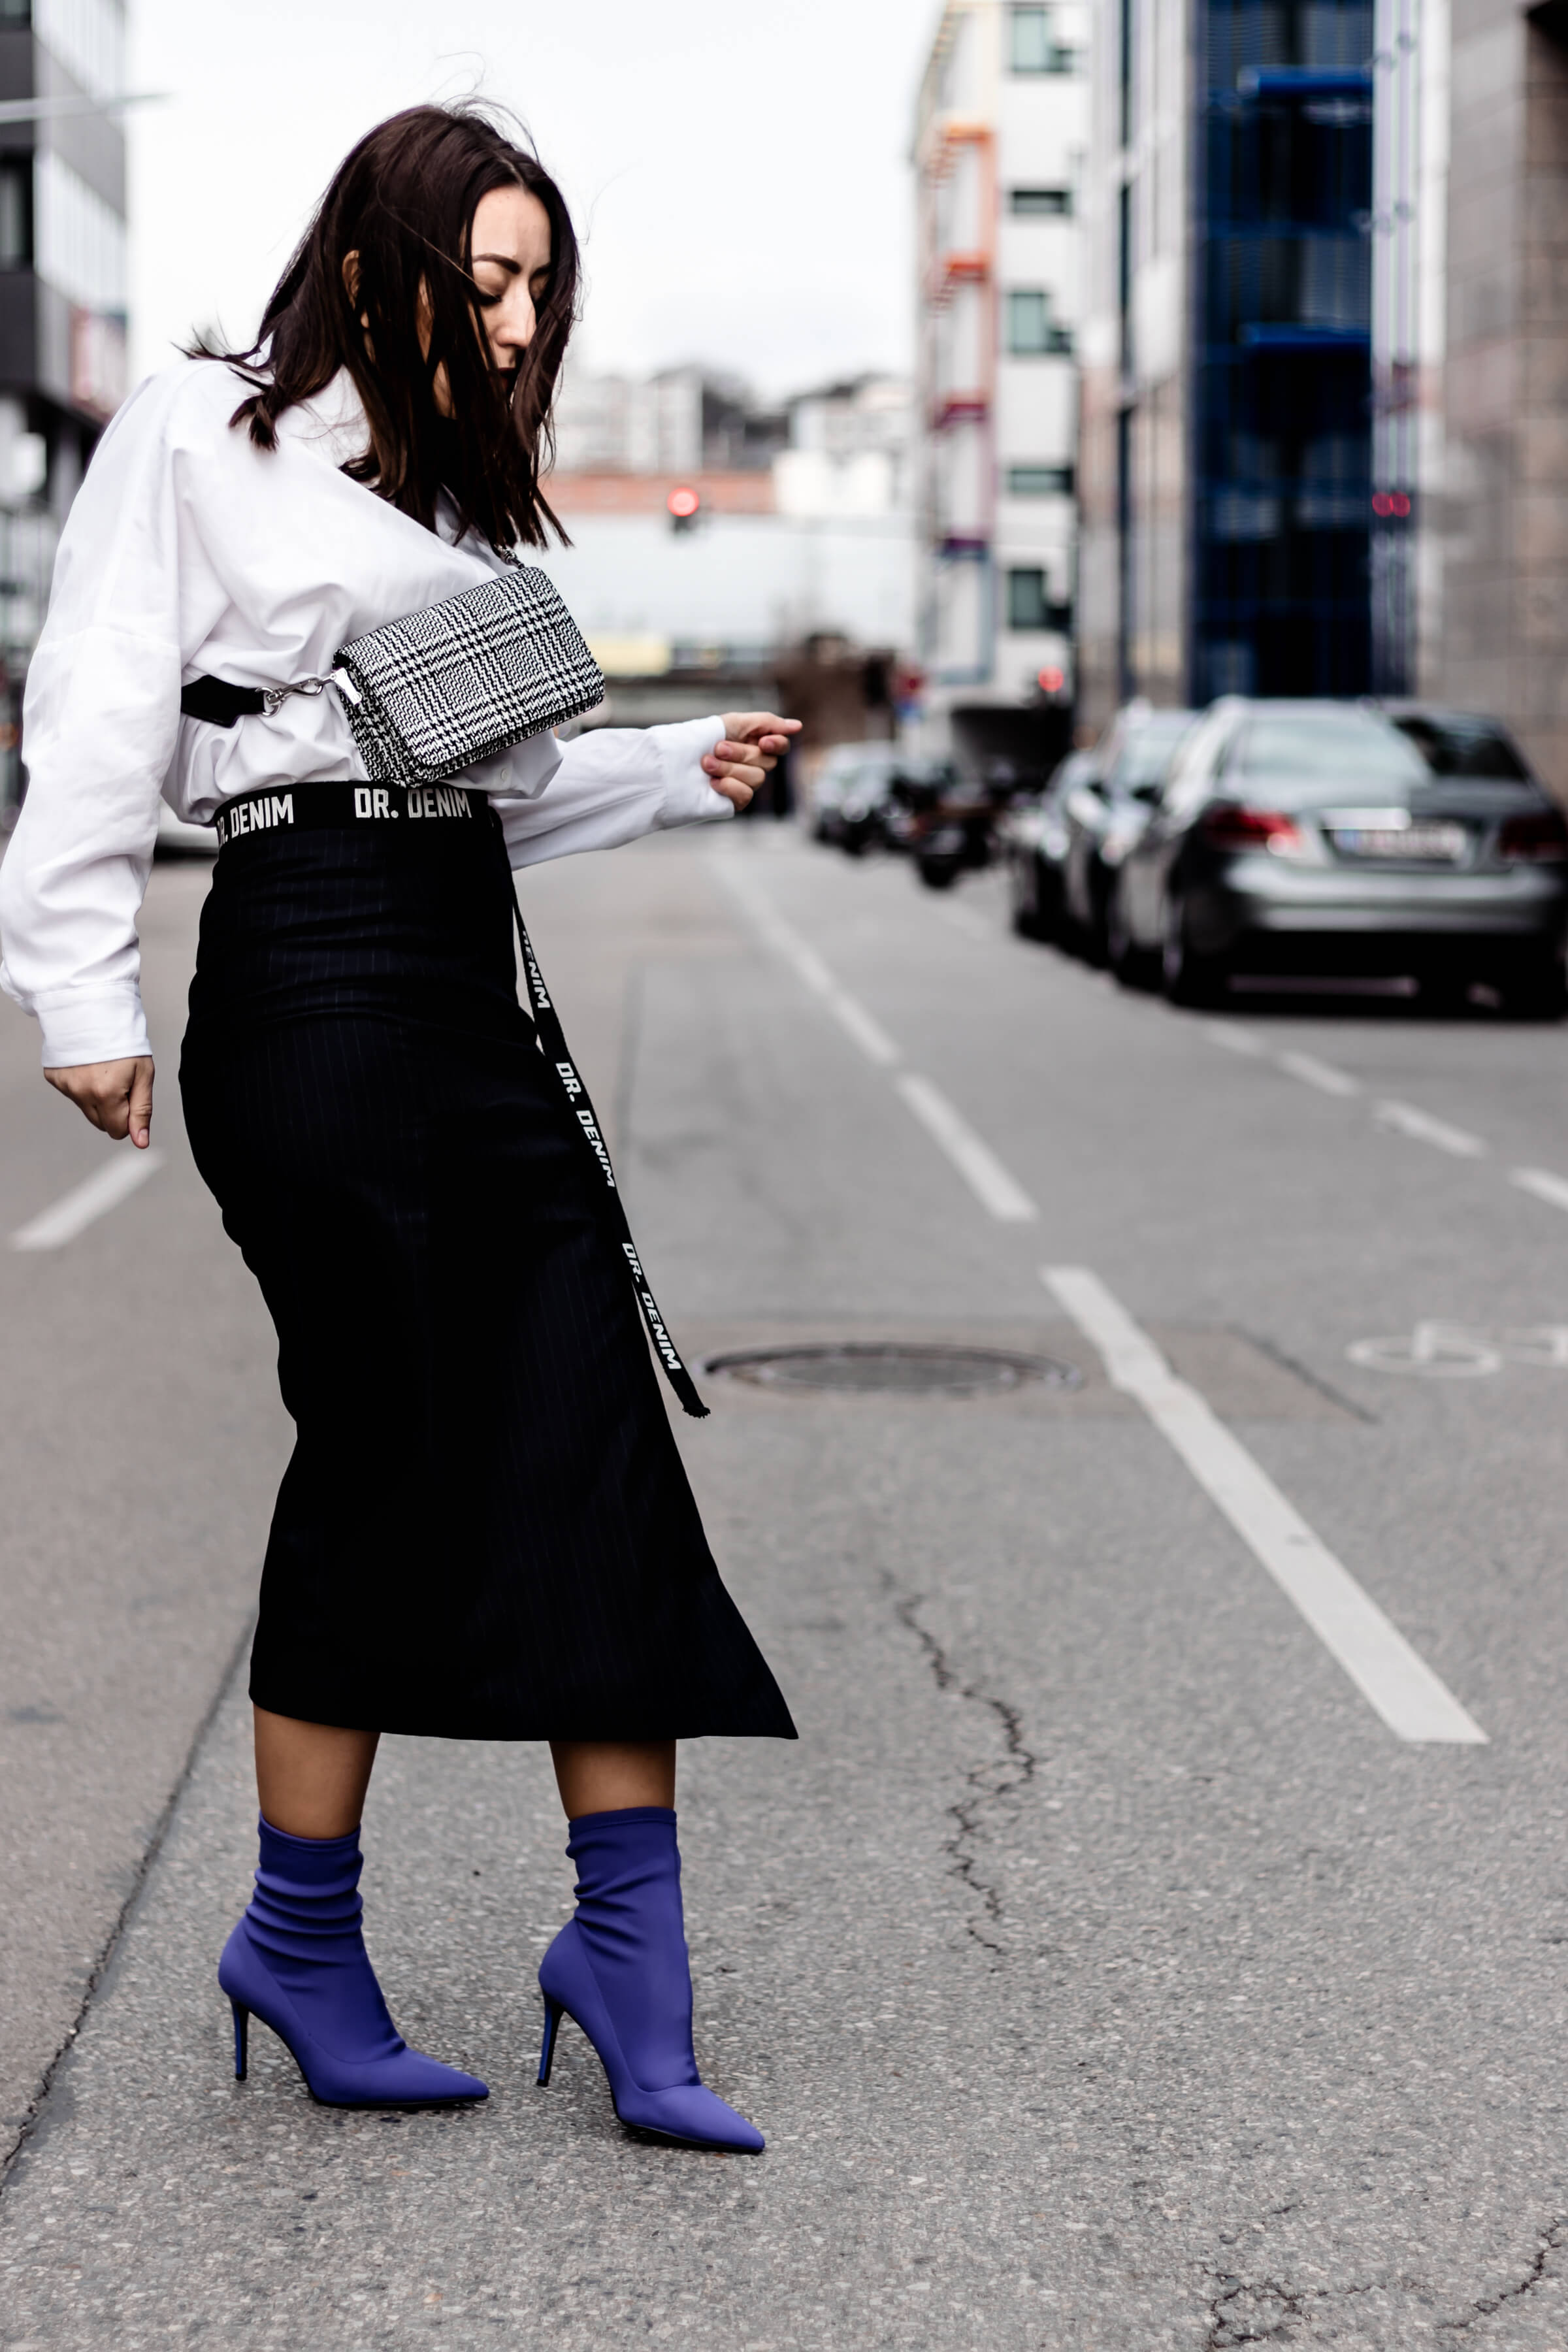 How to style a pencil skirt?